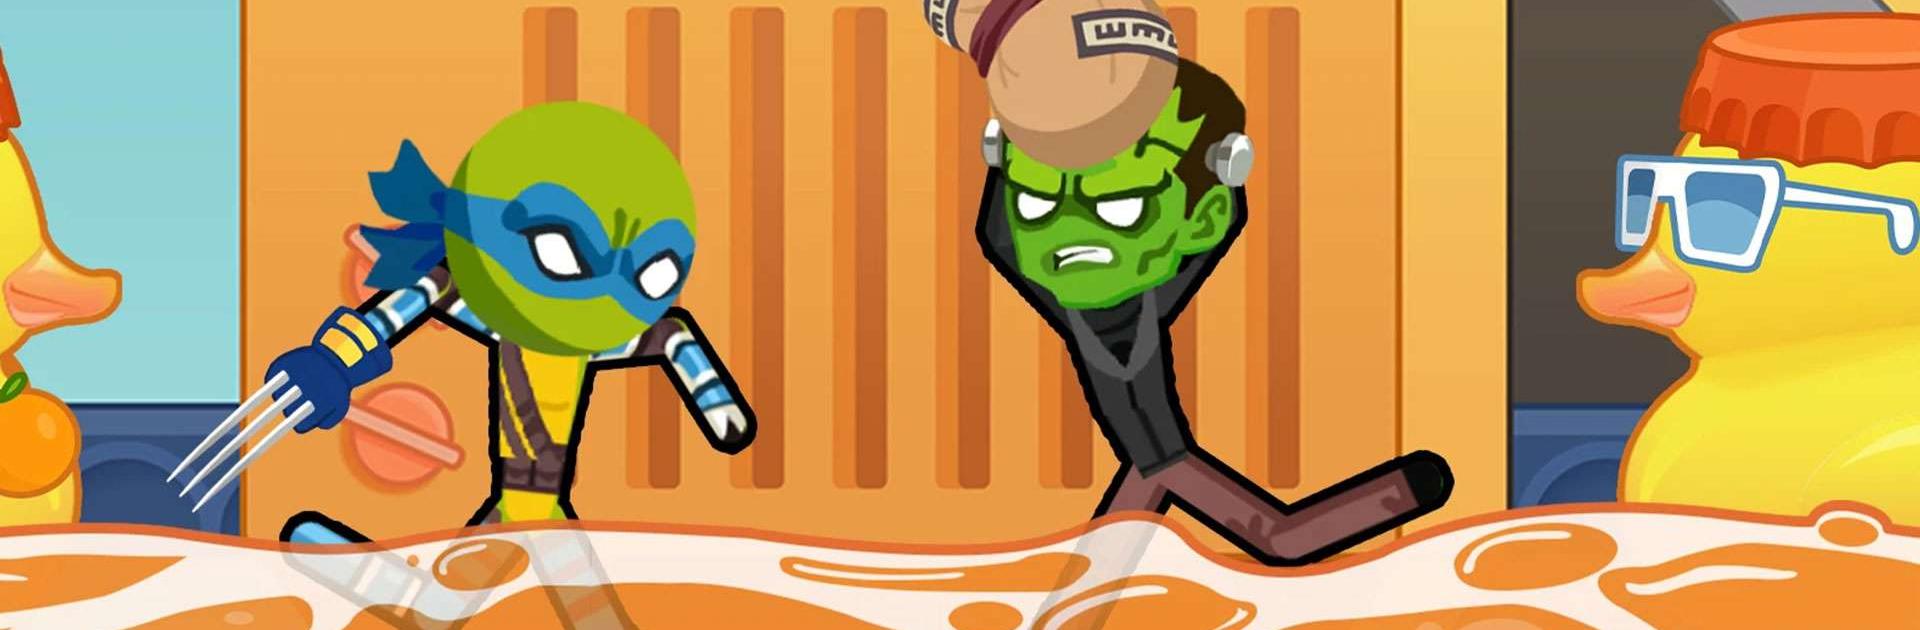 Supreme Brawl Stickman Fight for Android - Free App Download